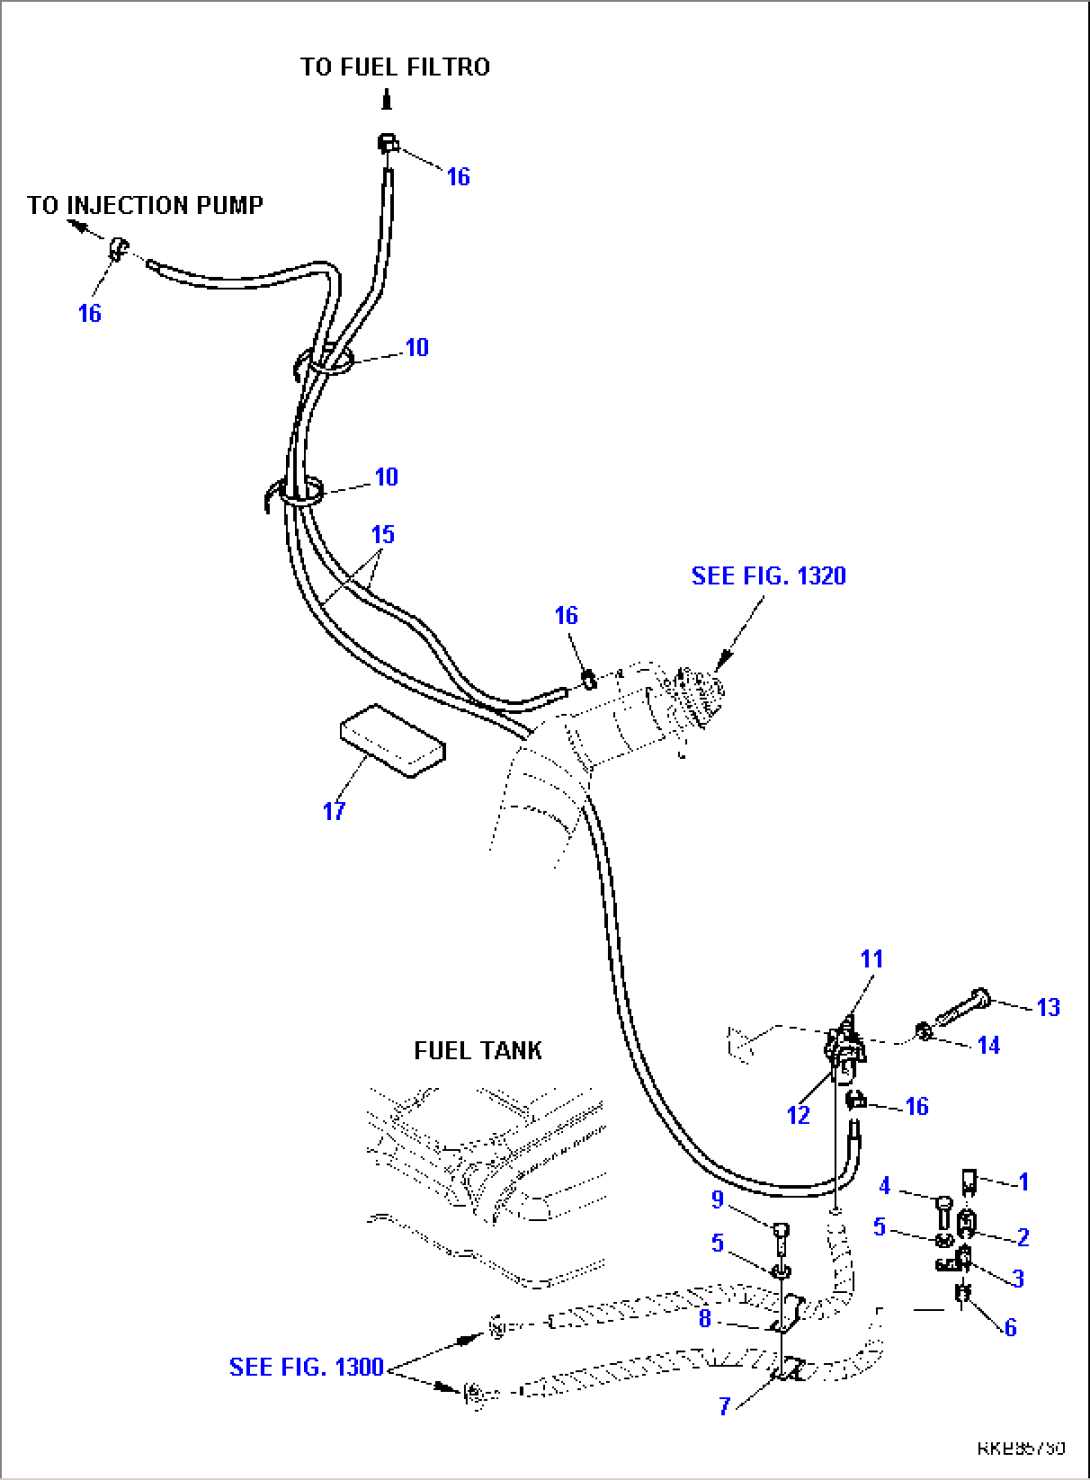 FUEL PIPING (1/2)